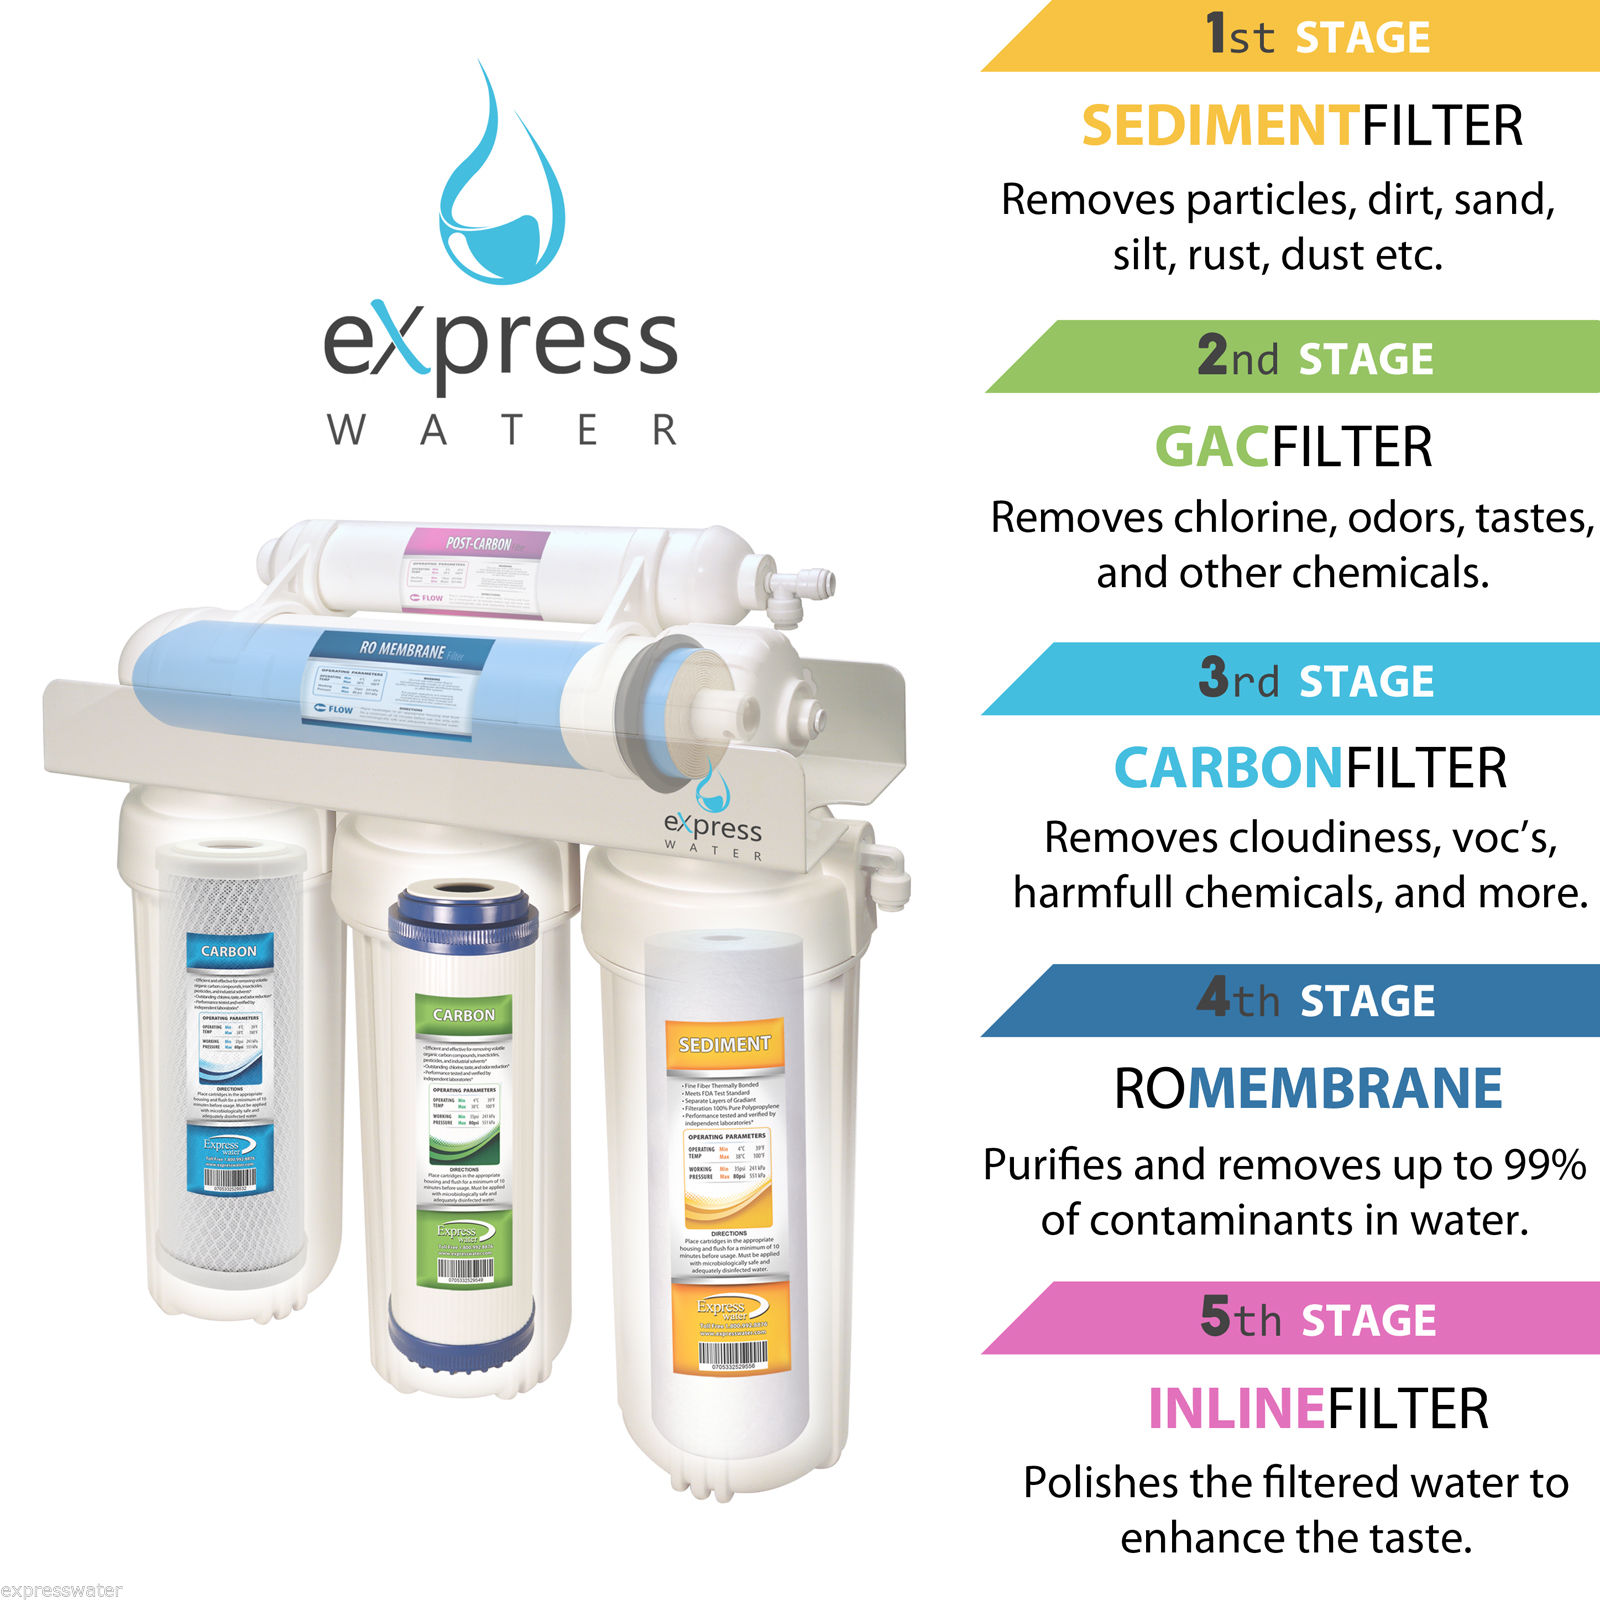 Вода м 160. Express Water. Express Water м. Selmar Reverse Osmosis System. Particle Remover.